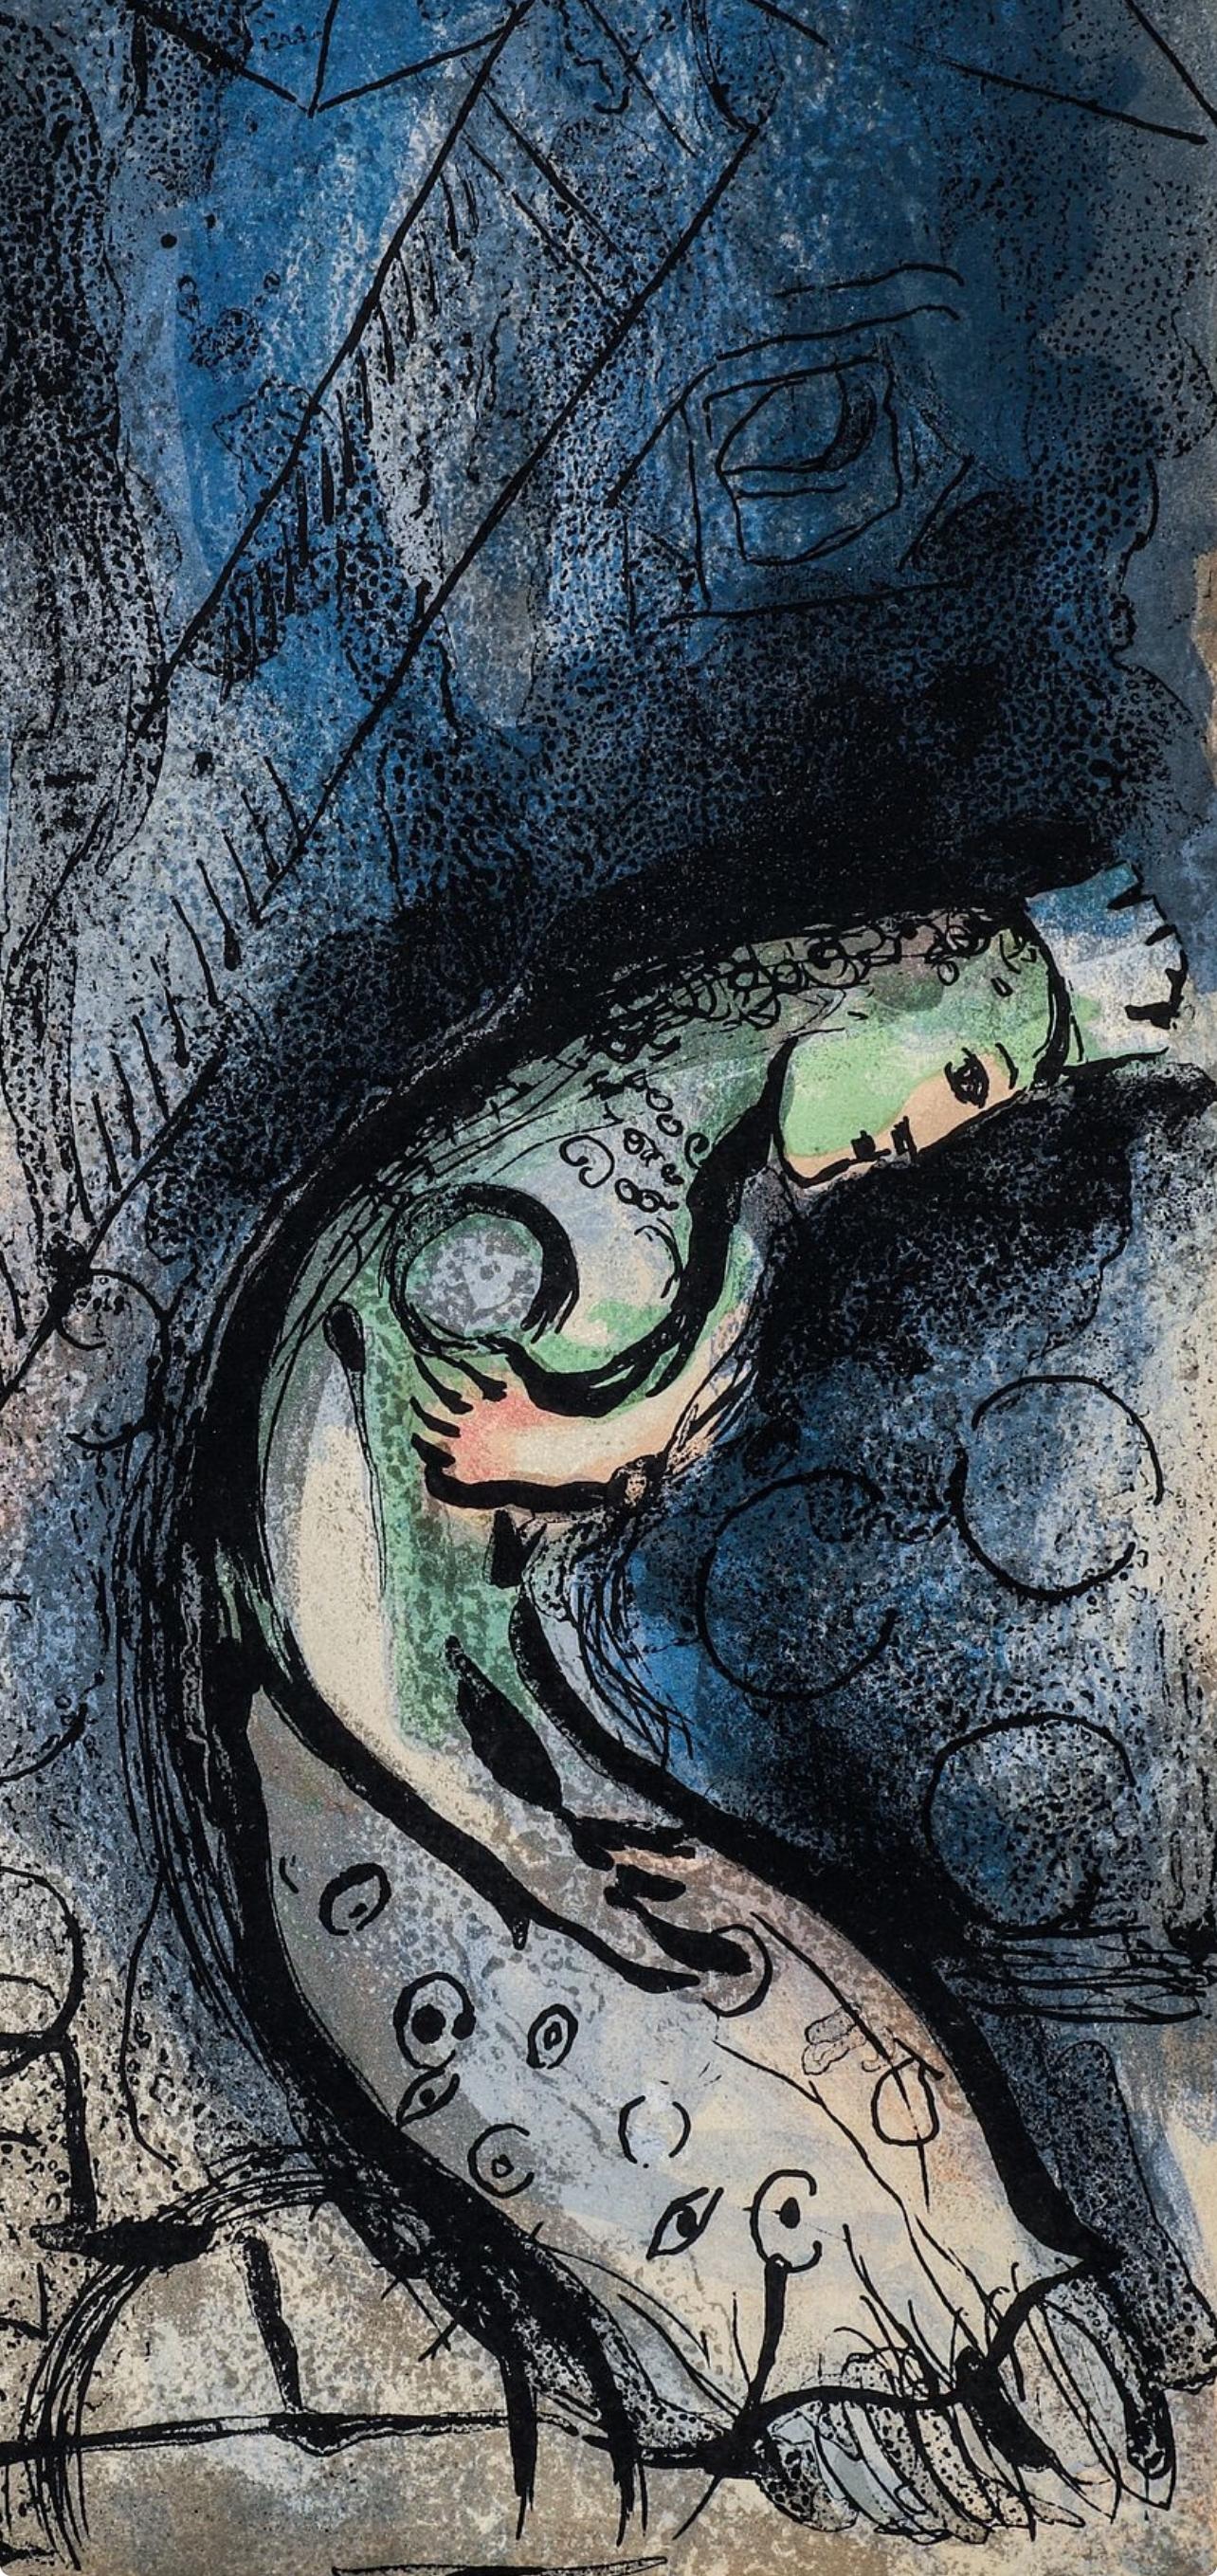 Chagall, Ahaseurus (Mourlot 251; Cramer 42), Verve: Revue Artistique (after) - Expressionist Print by Marc Chagall